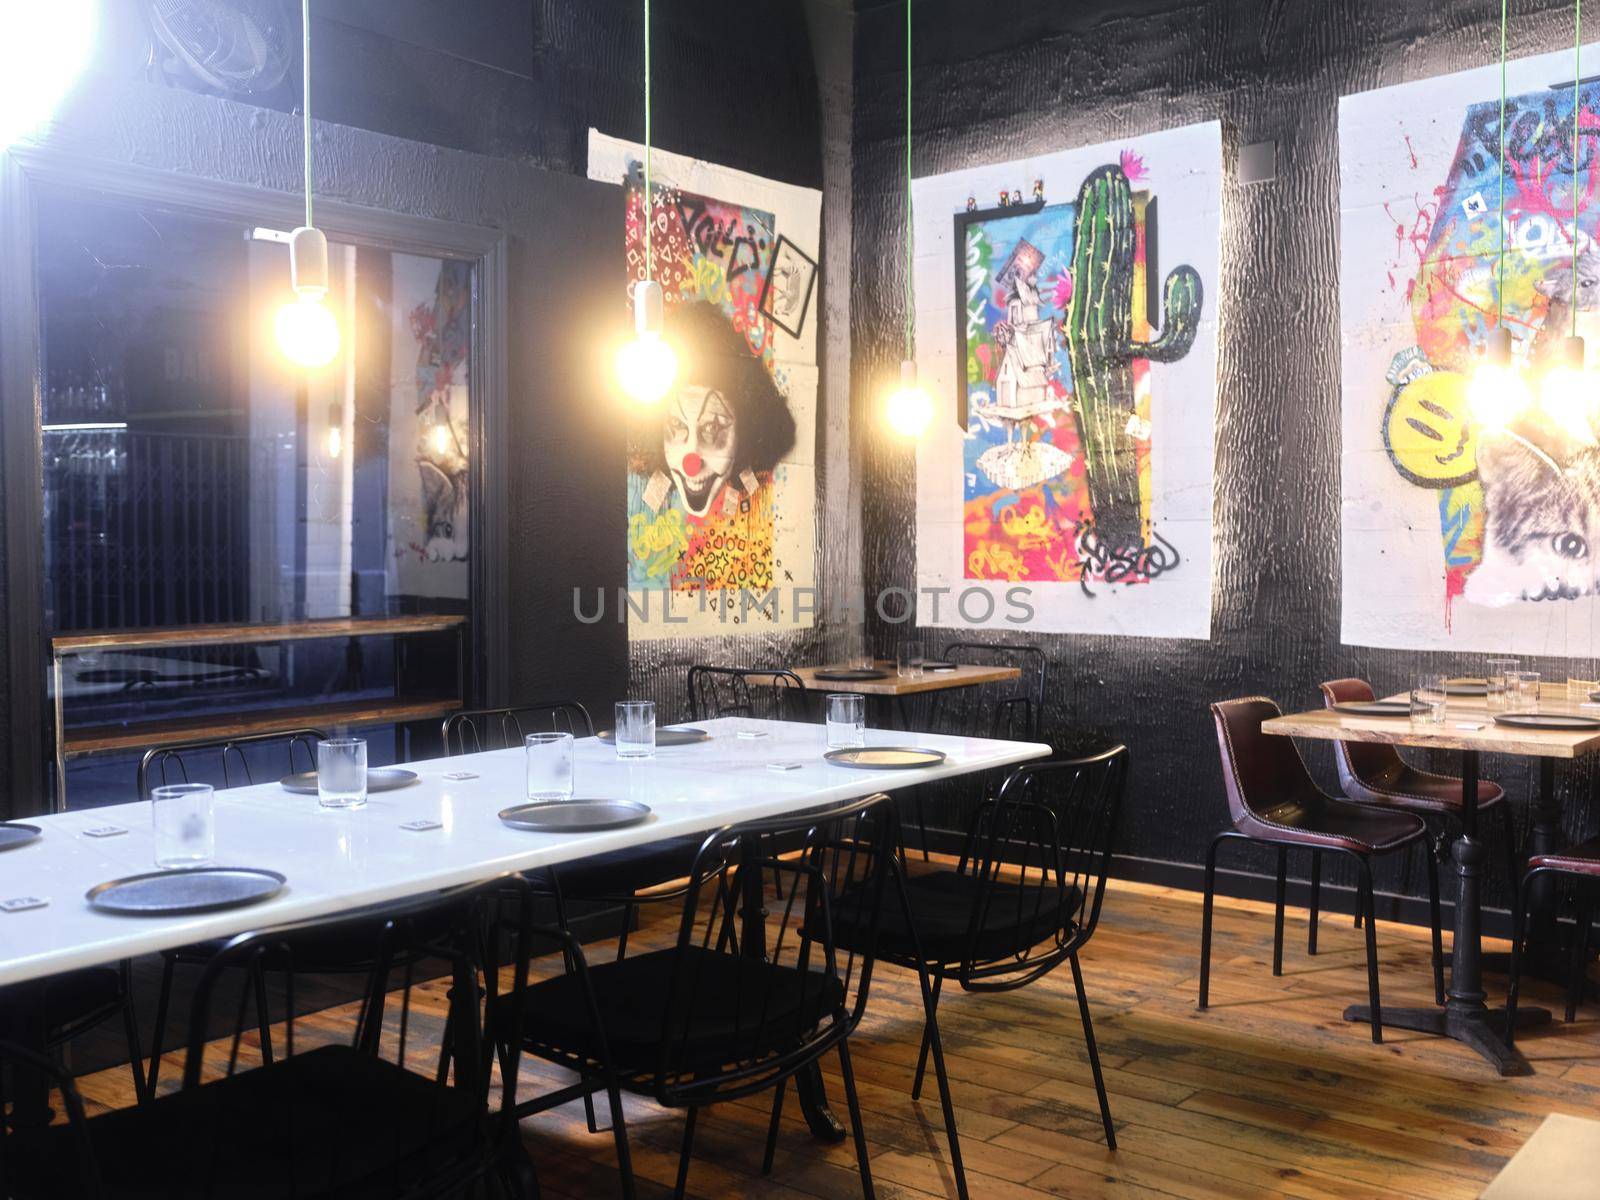 Interior of a modern restaurant decorated with paintings with graffiti on the walls